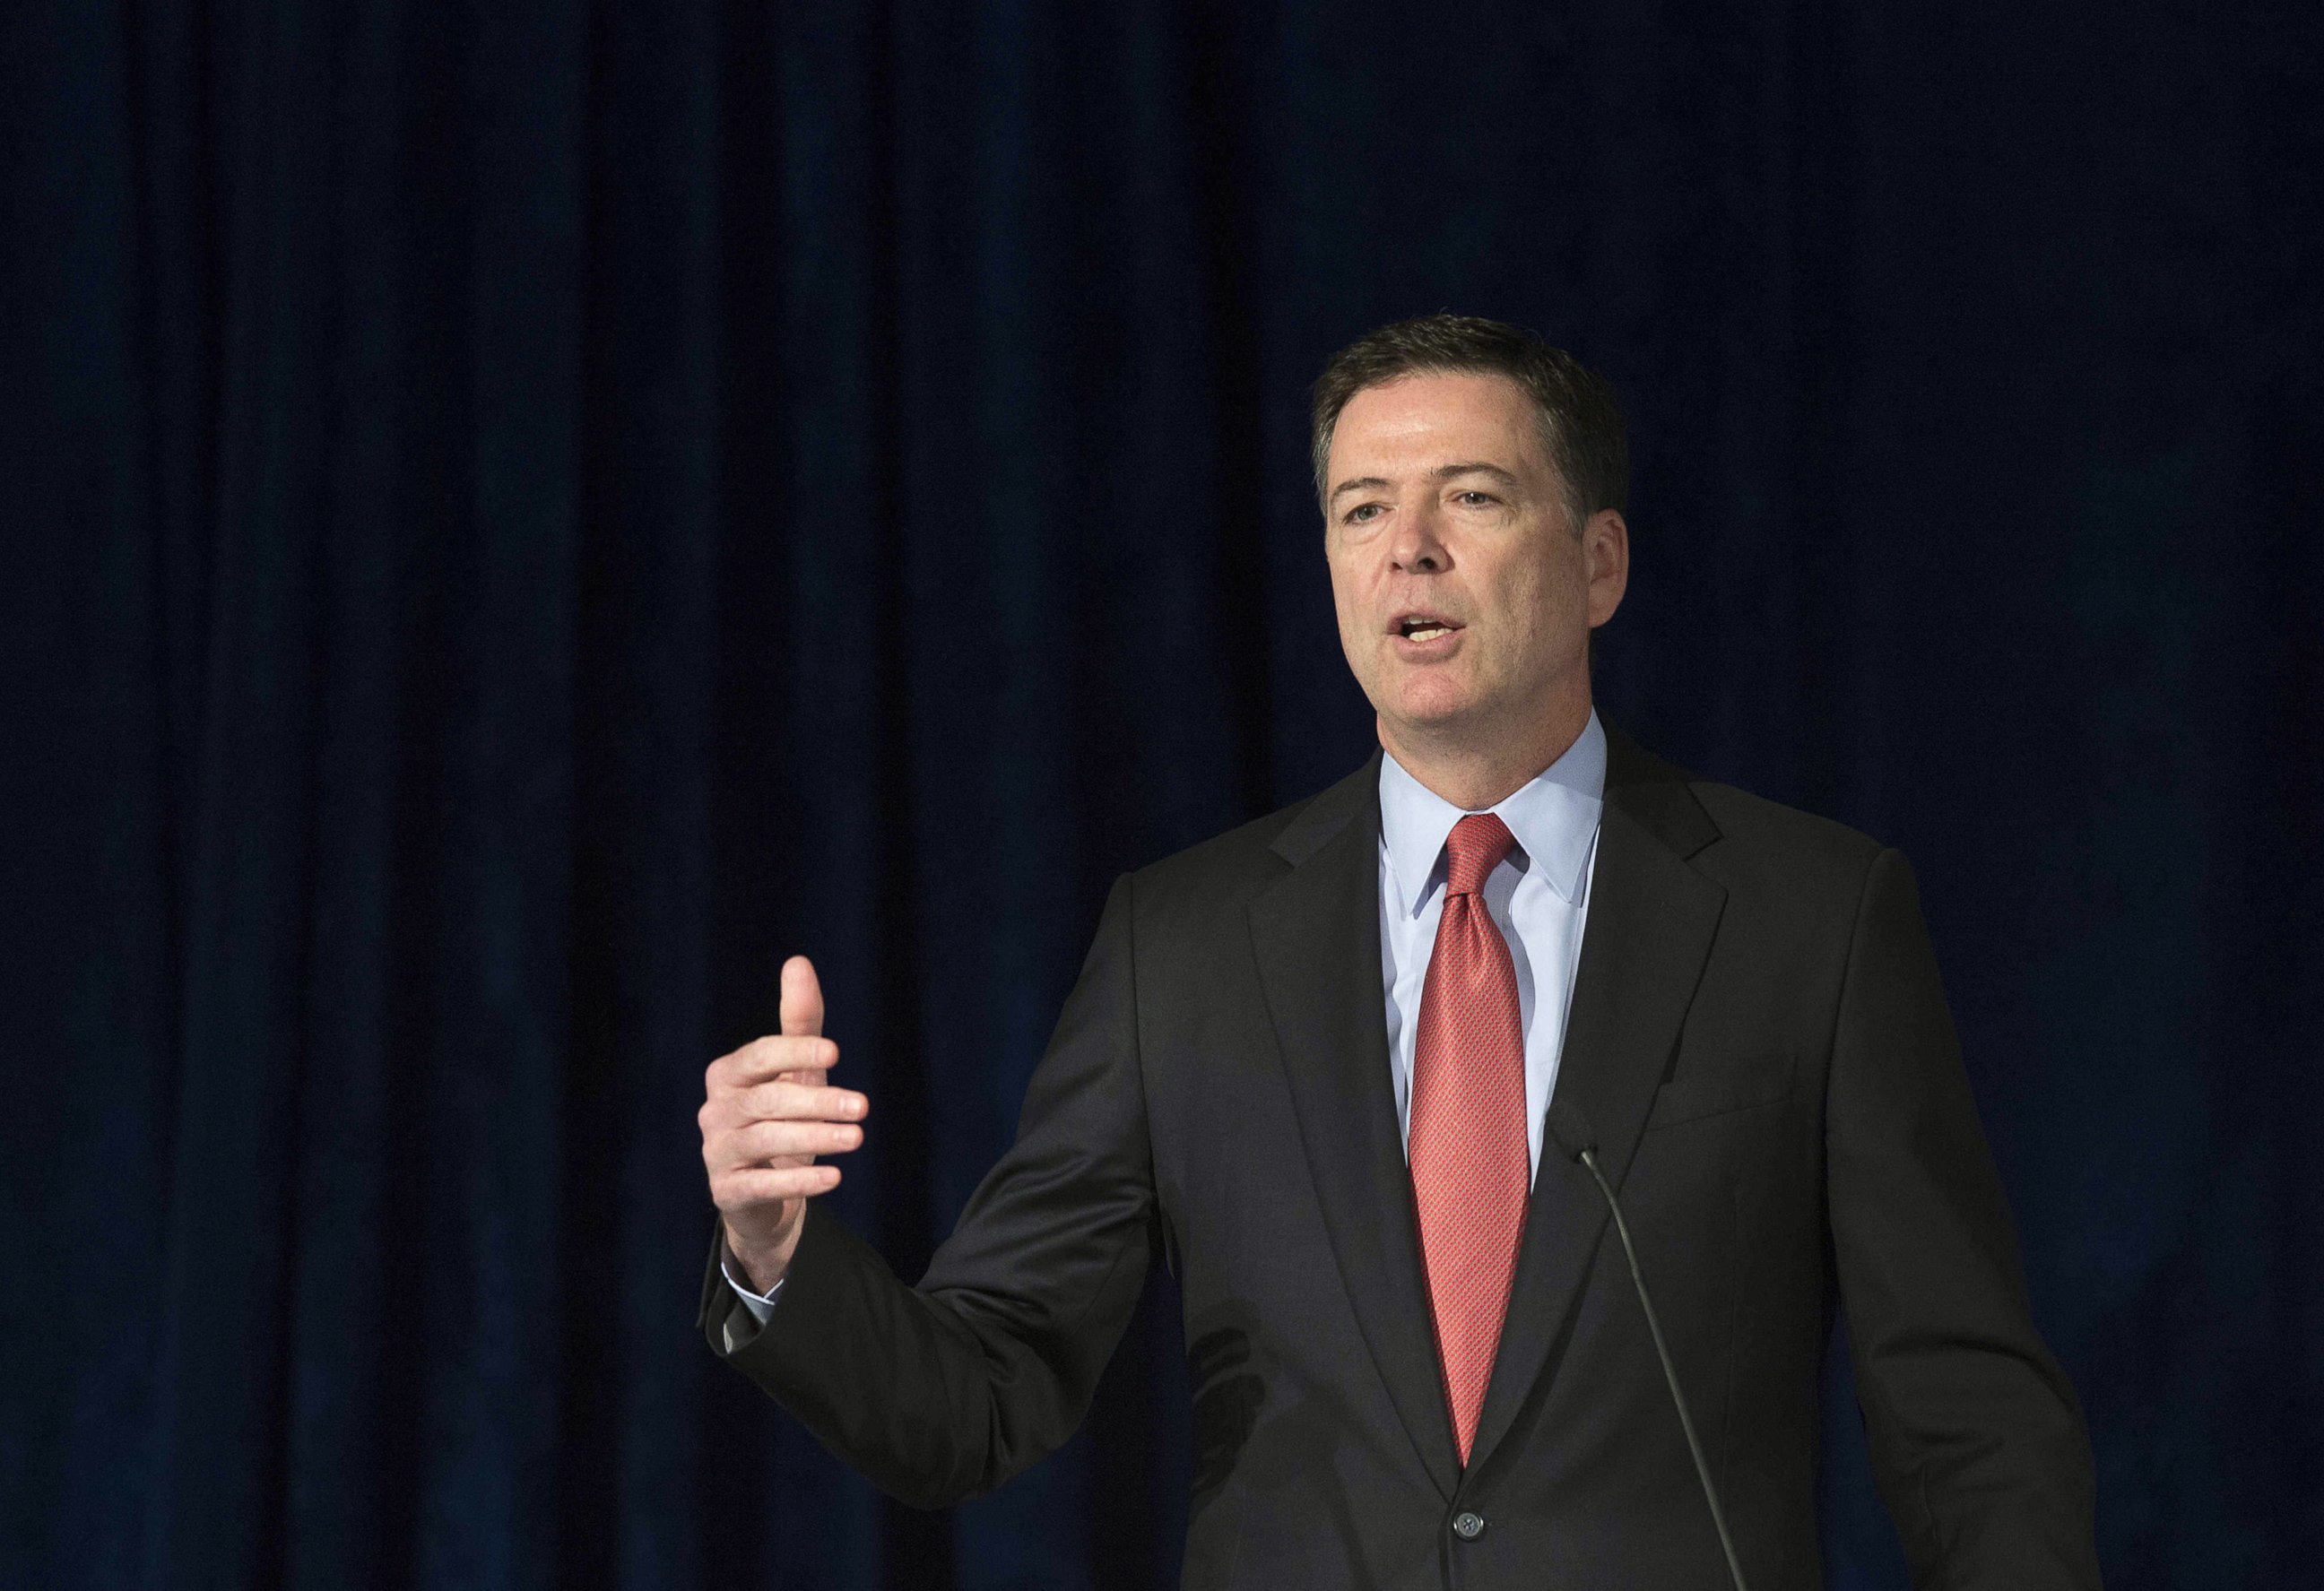 PHOTO: Federal Bureau of Investigation (FBI) Director James Comey addresses the American Law Institute's annual meeting in Washington, May 19, 2015.